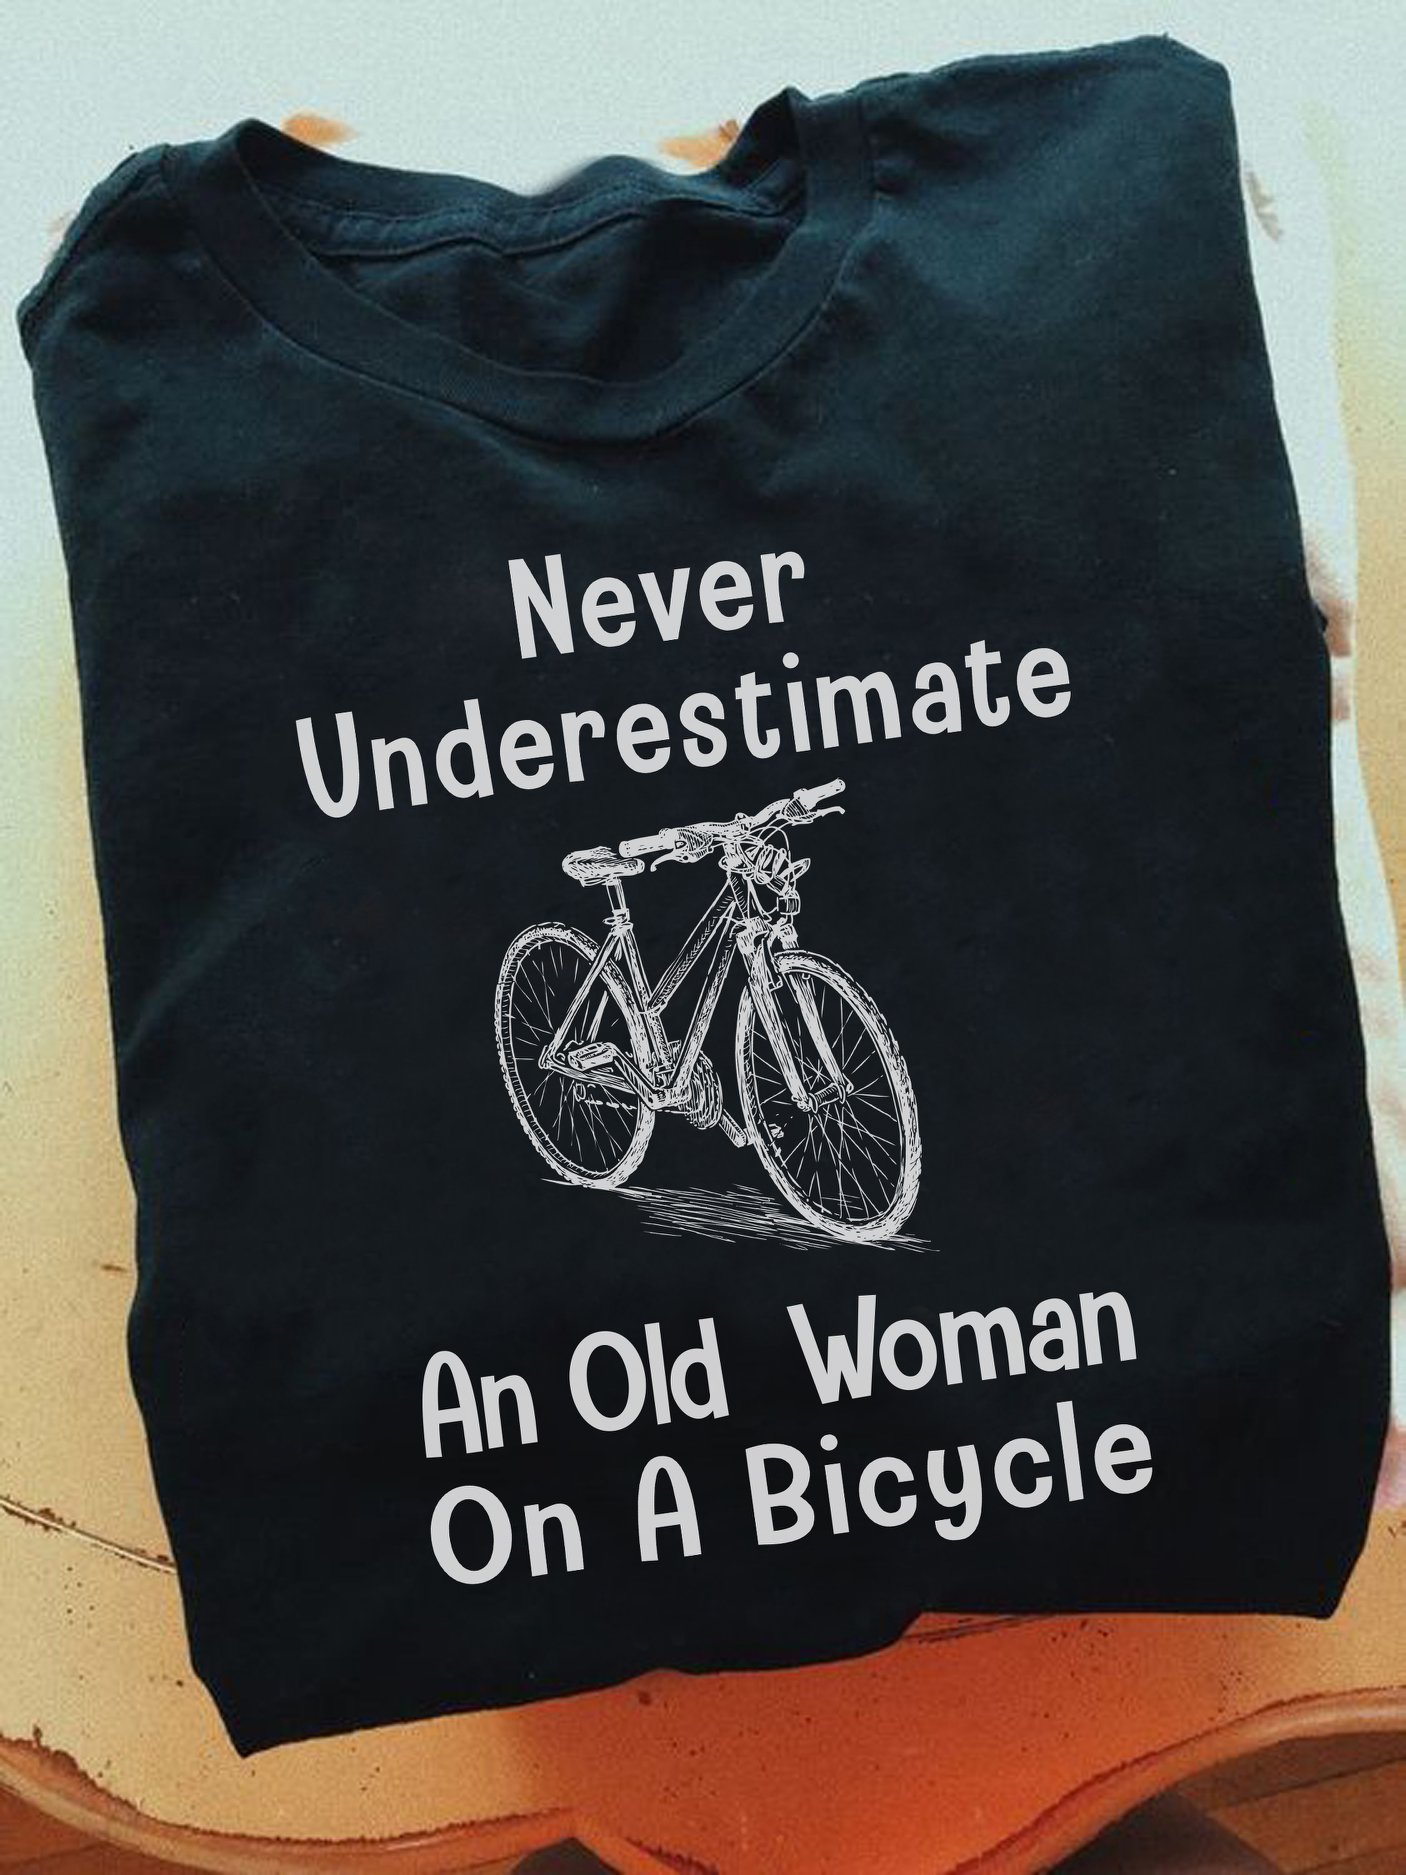 Never underestimate an old woman on a bicycle